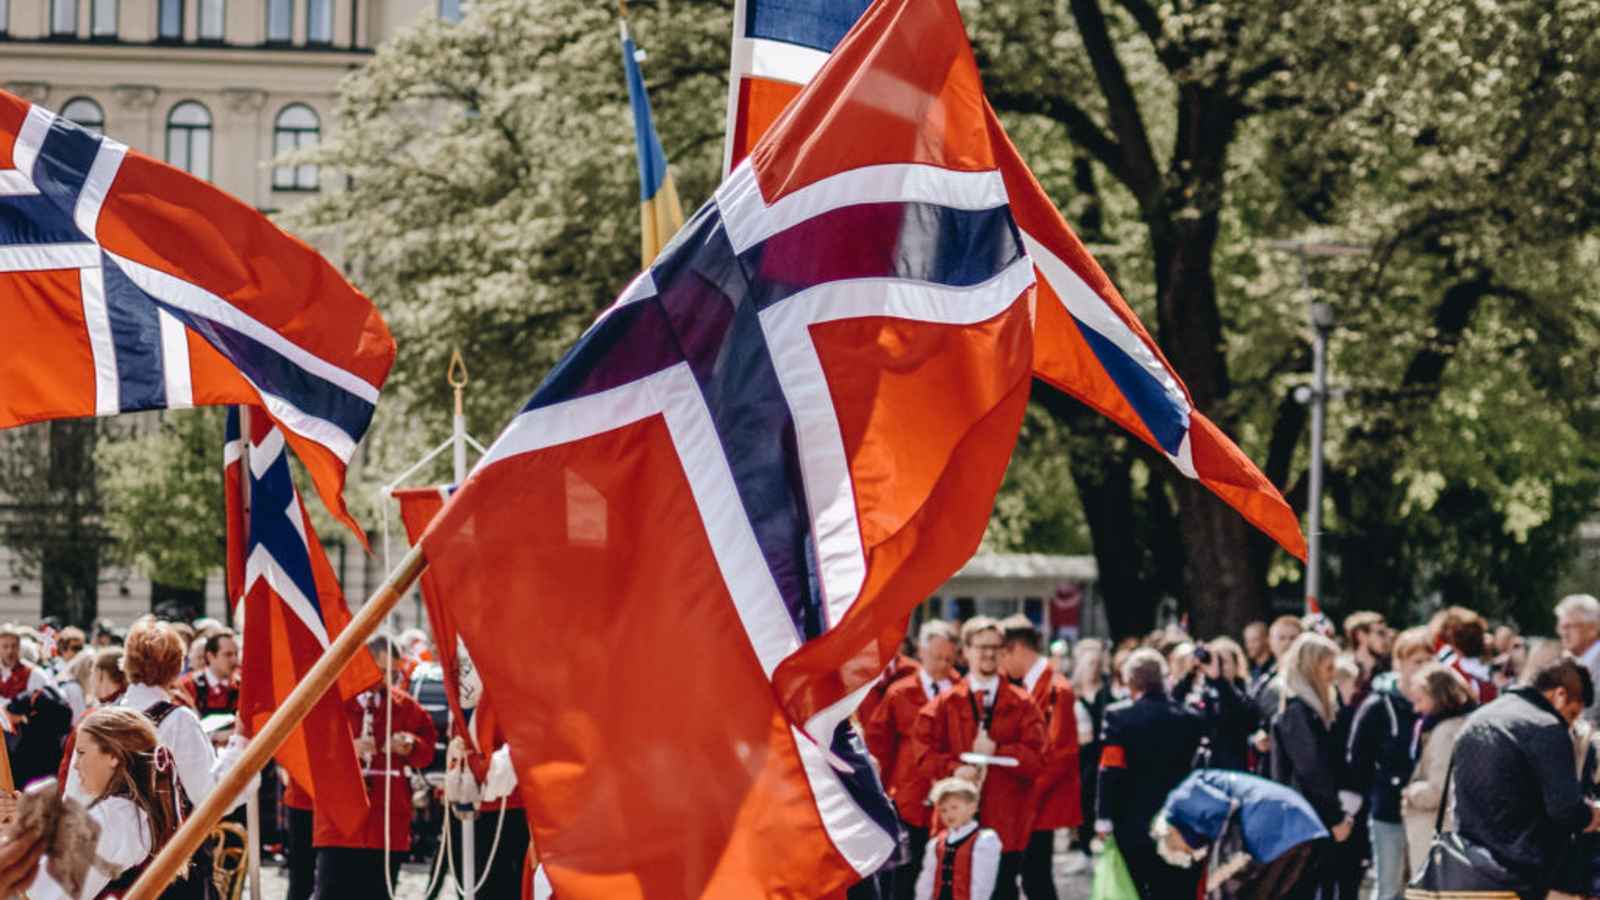 Dissolution of Union between Norway and Sweden 2023: Date, History, Facts about Norway